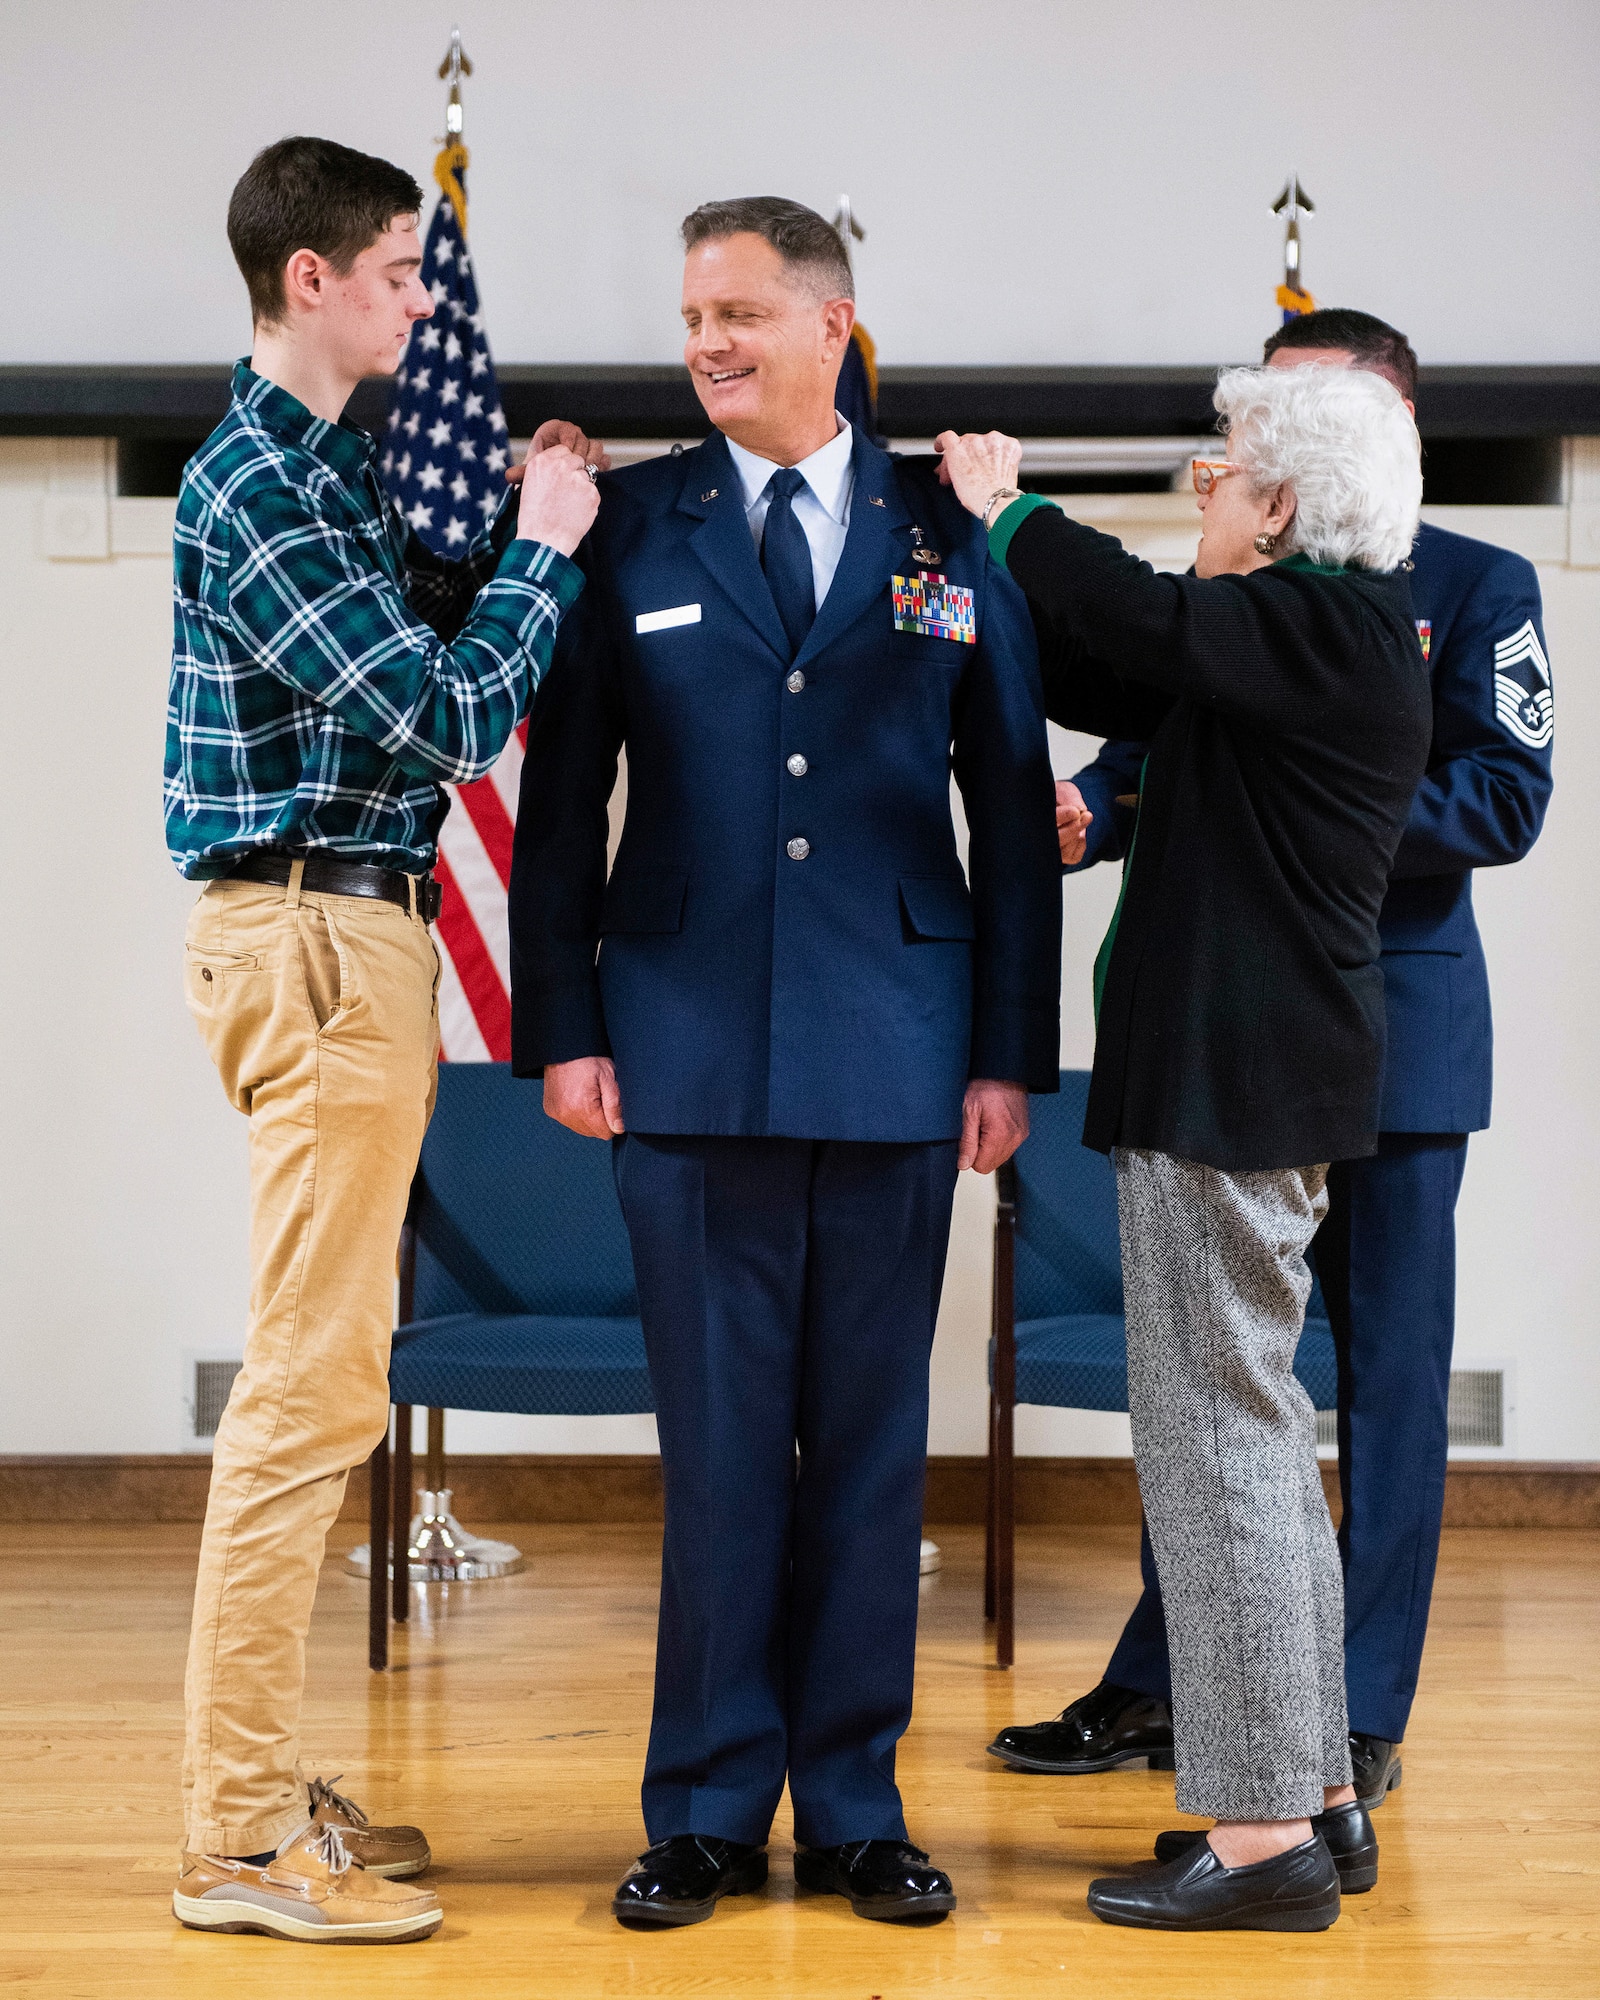 Chaplain Fred Ehrman is promoted to the rank of colonel with the help of family members during a ceremony at the Kentucky Air National Guard Base in Louisville, Ky., Jan. 5, 2019. Ehrman, who previously served as chaplain at the Kentucky Air Guard's 123rd Airlift Wing, is now Air National Guard assistant to the chaplain, U.S. Air Forces Europe and Air Forces Africa. (U.S. Air National Guard photo by Master Sgt. Vicky Spesard)